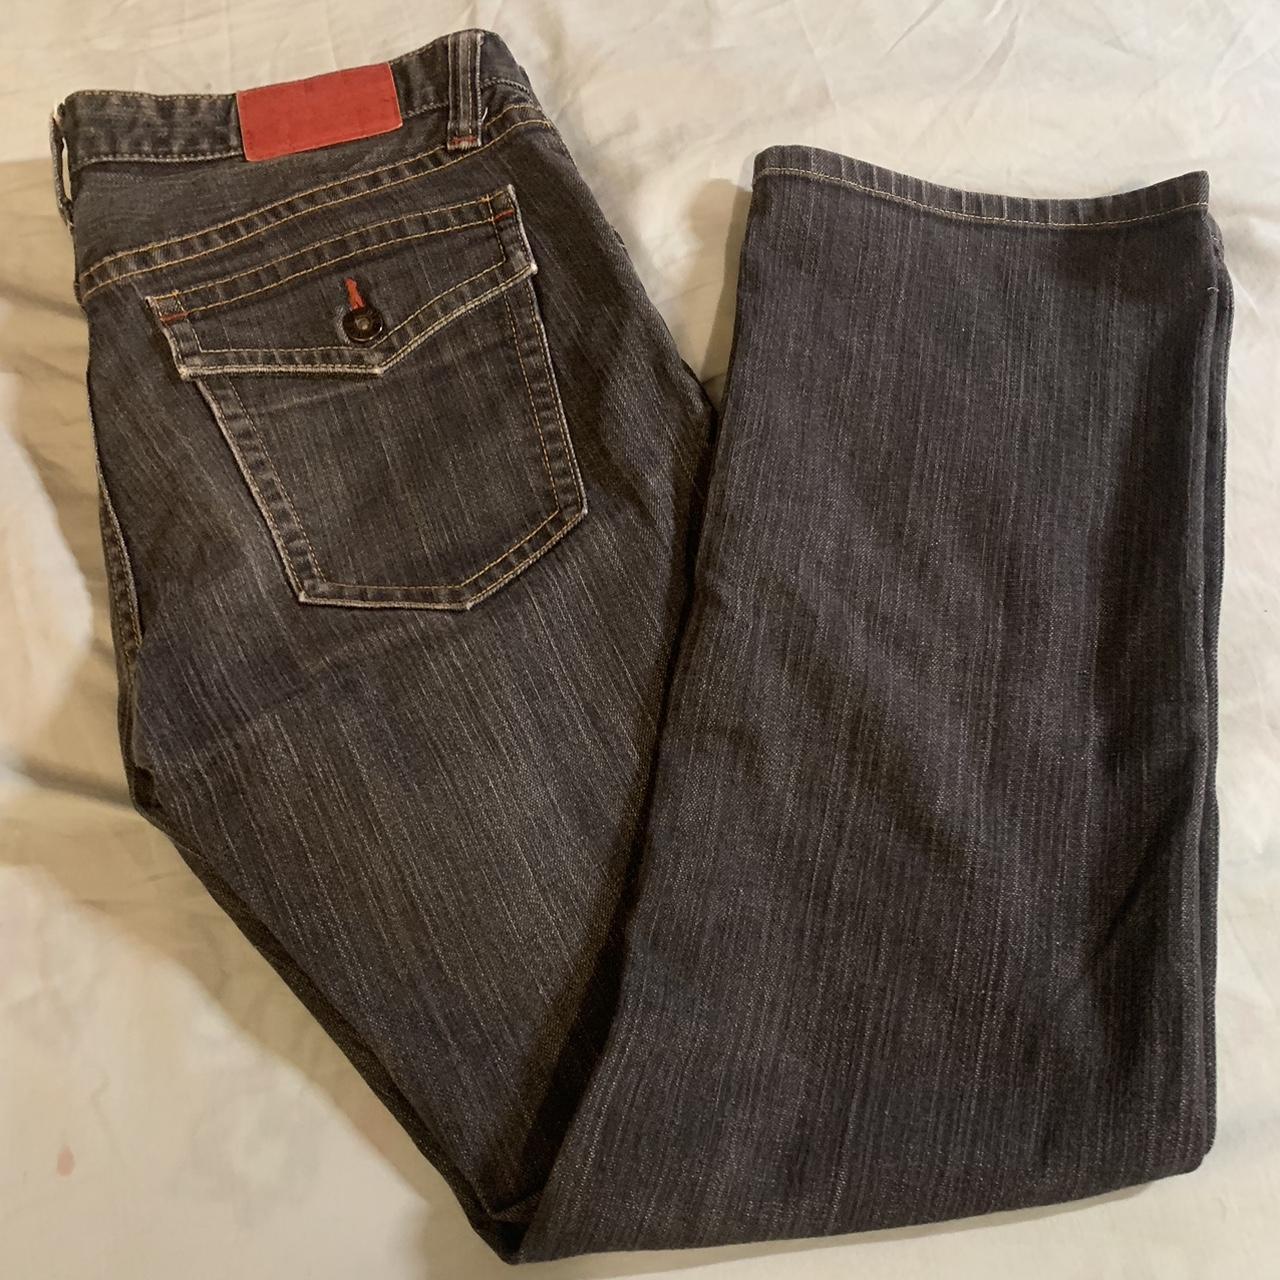 Vintage Uniqlo jeans Doesn’t have sizing but I’d... - Depop